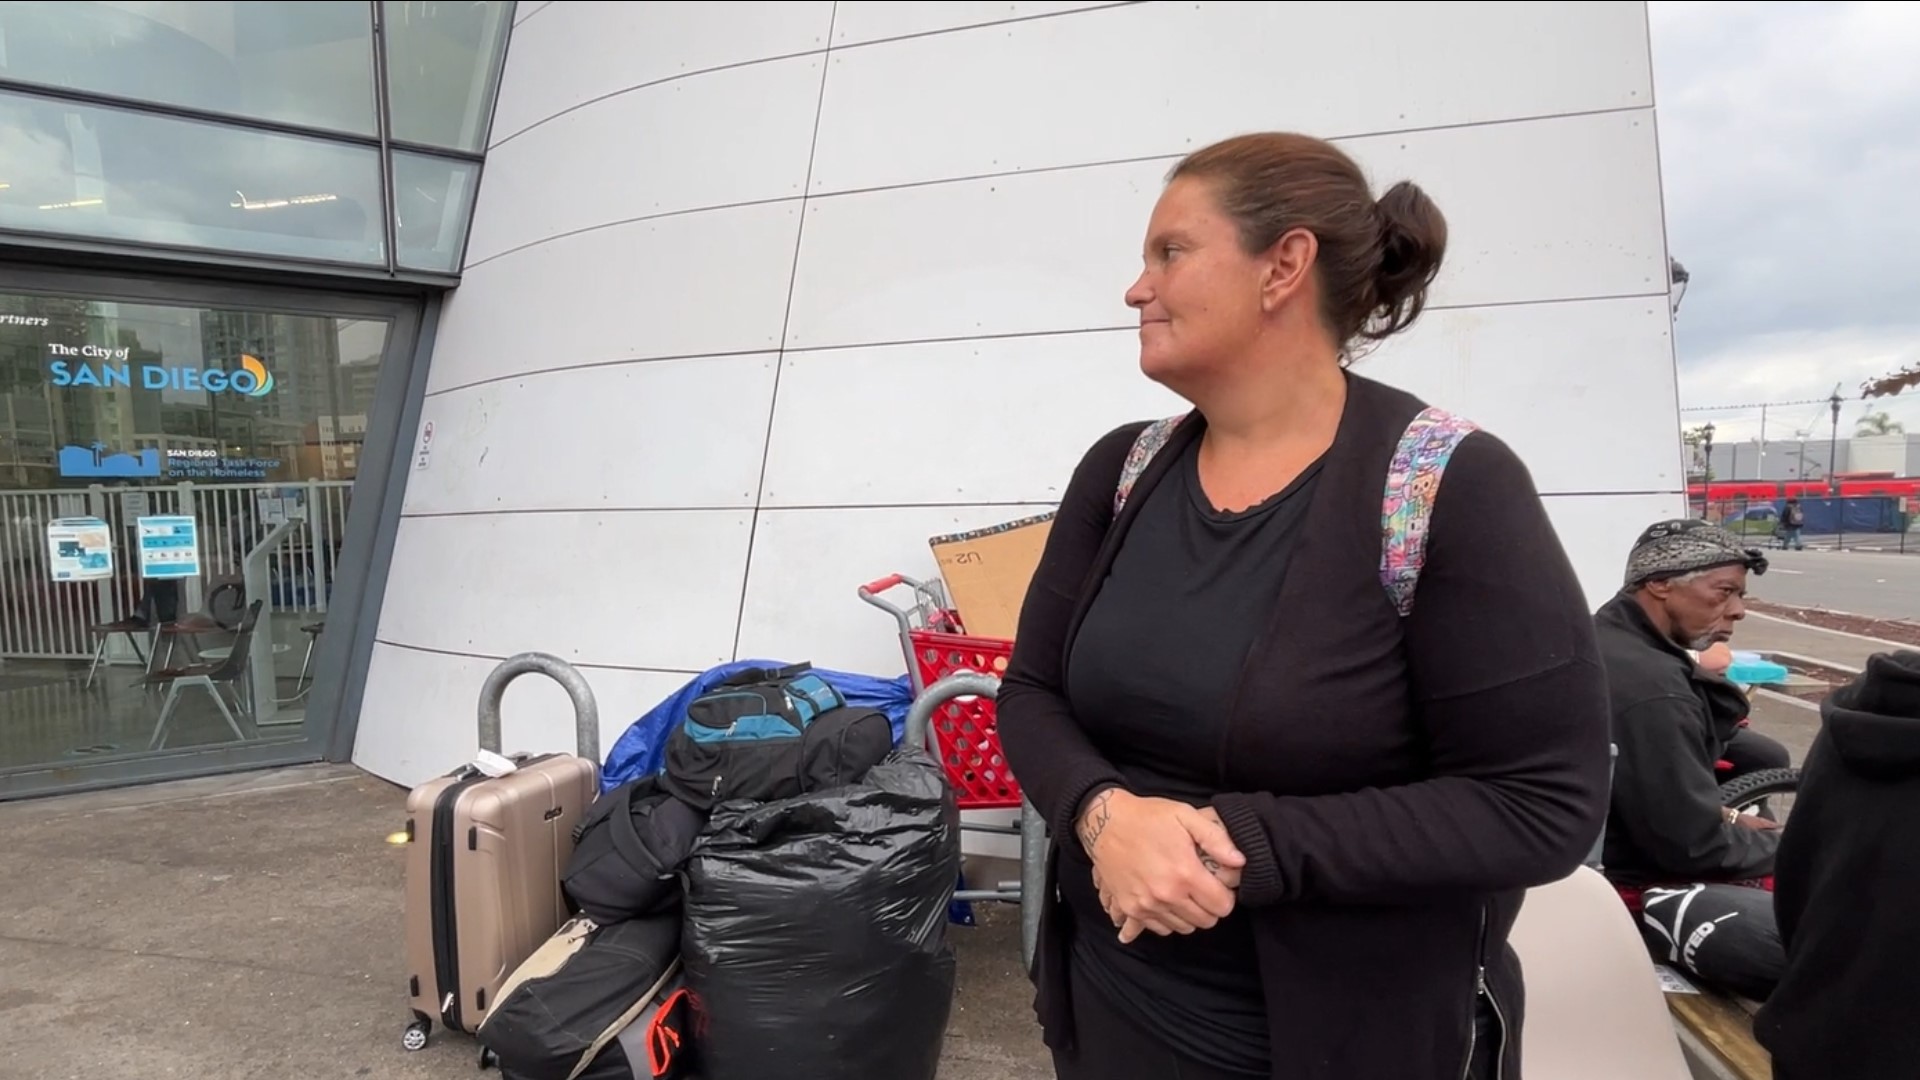 Jennifer has been homeless, attending college and working full time since April and has been unsuccessful in finding a shelter bed or city tent.